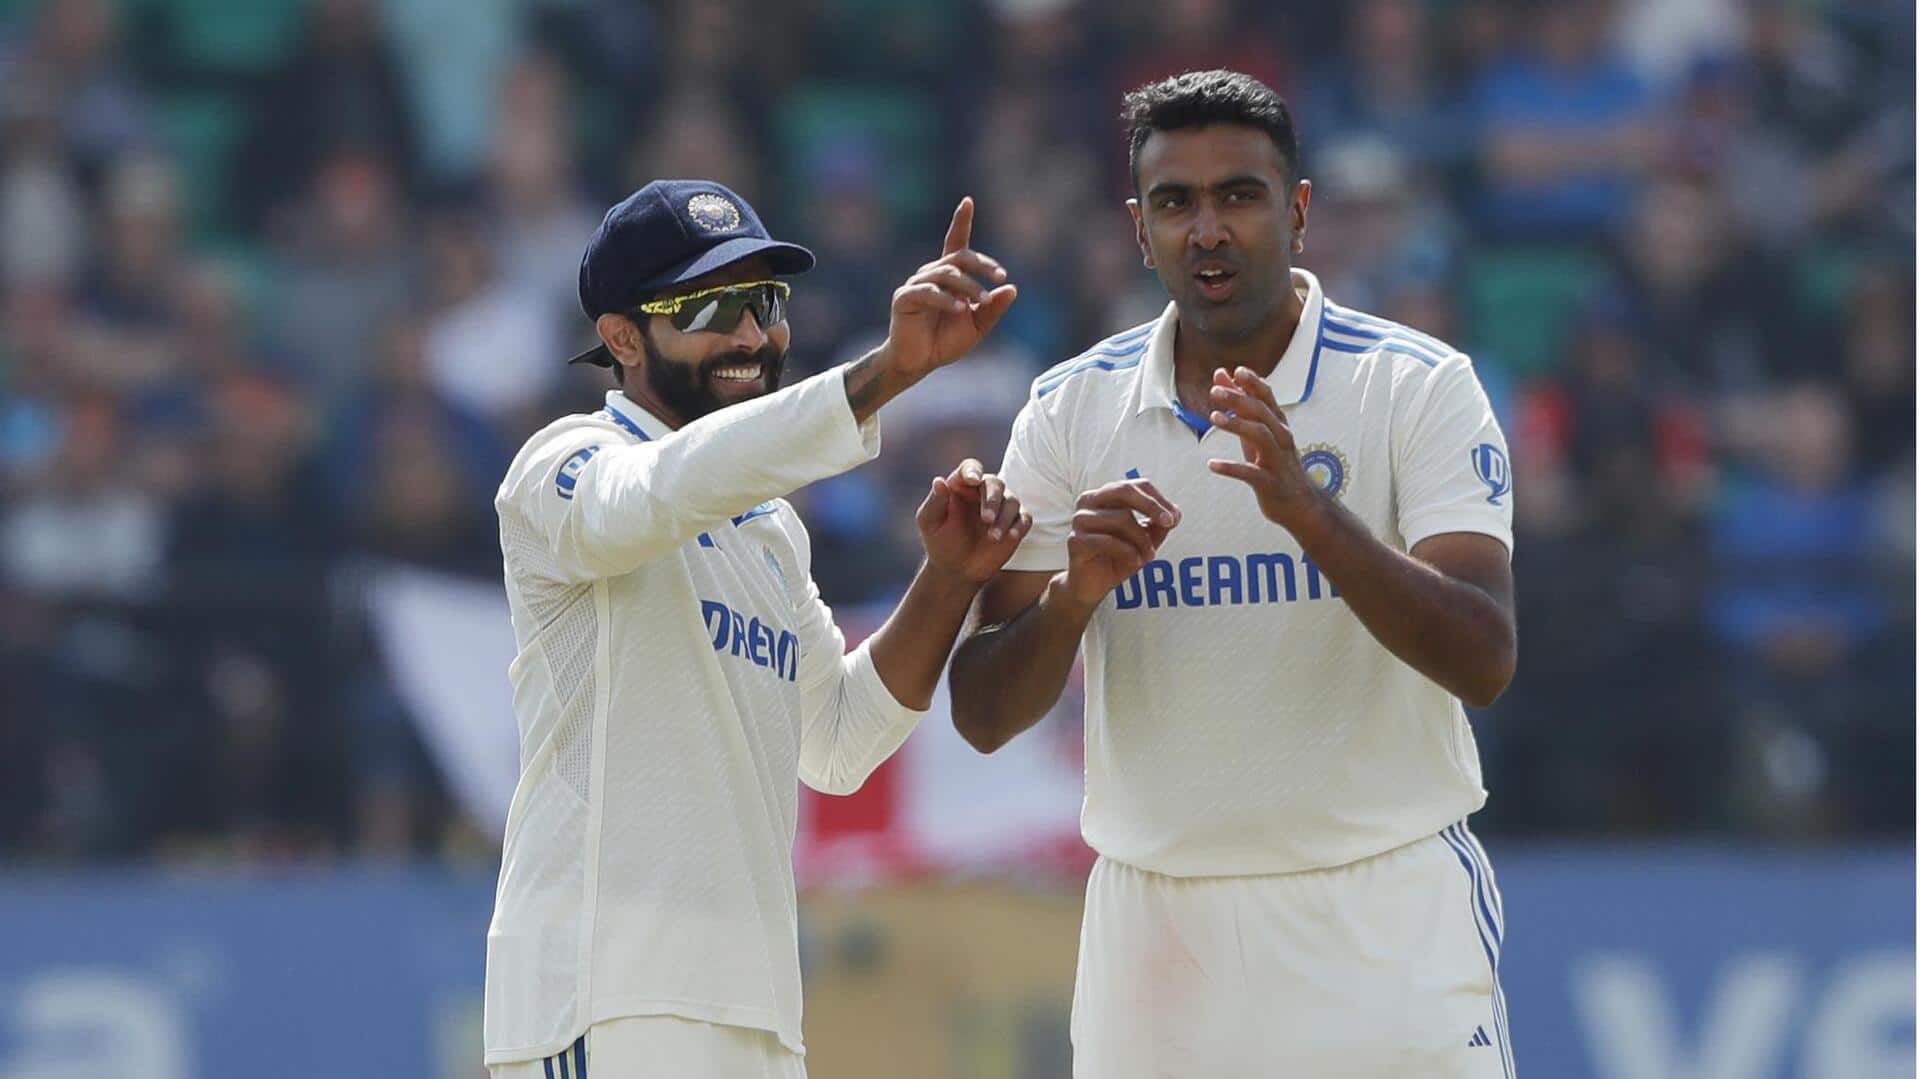 Ravichandran Ashwin shines in his 100th Test, claims four-fer: Stats